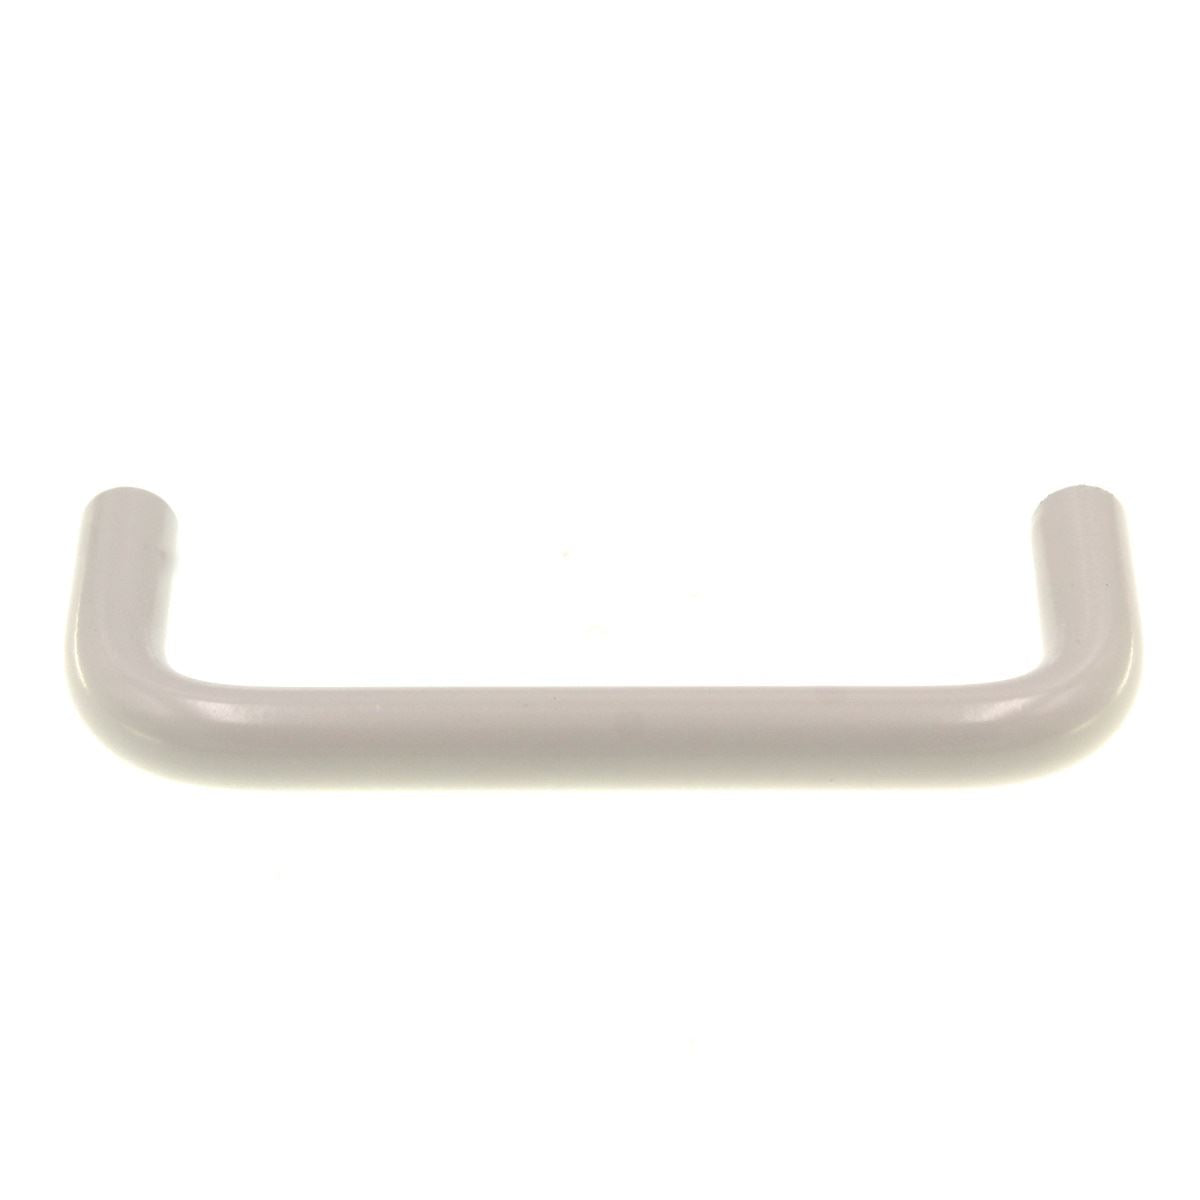 Ultra Hardware 3" Ctr. Solid Brass Cabinet Wire Pull White Powder Coat 59142